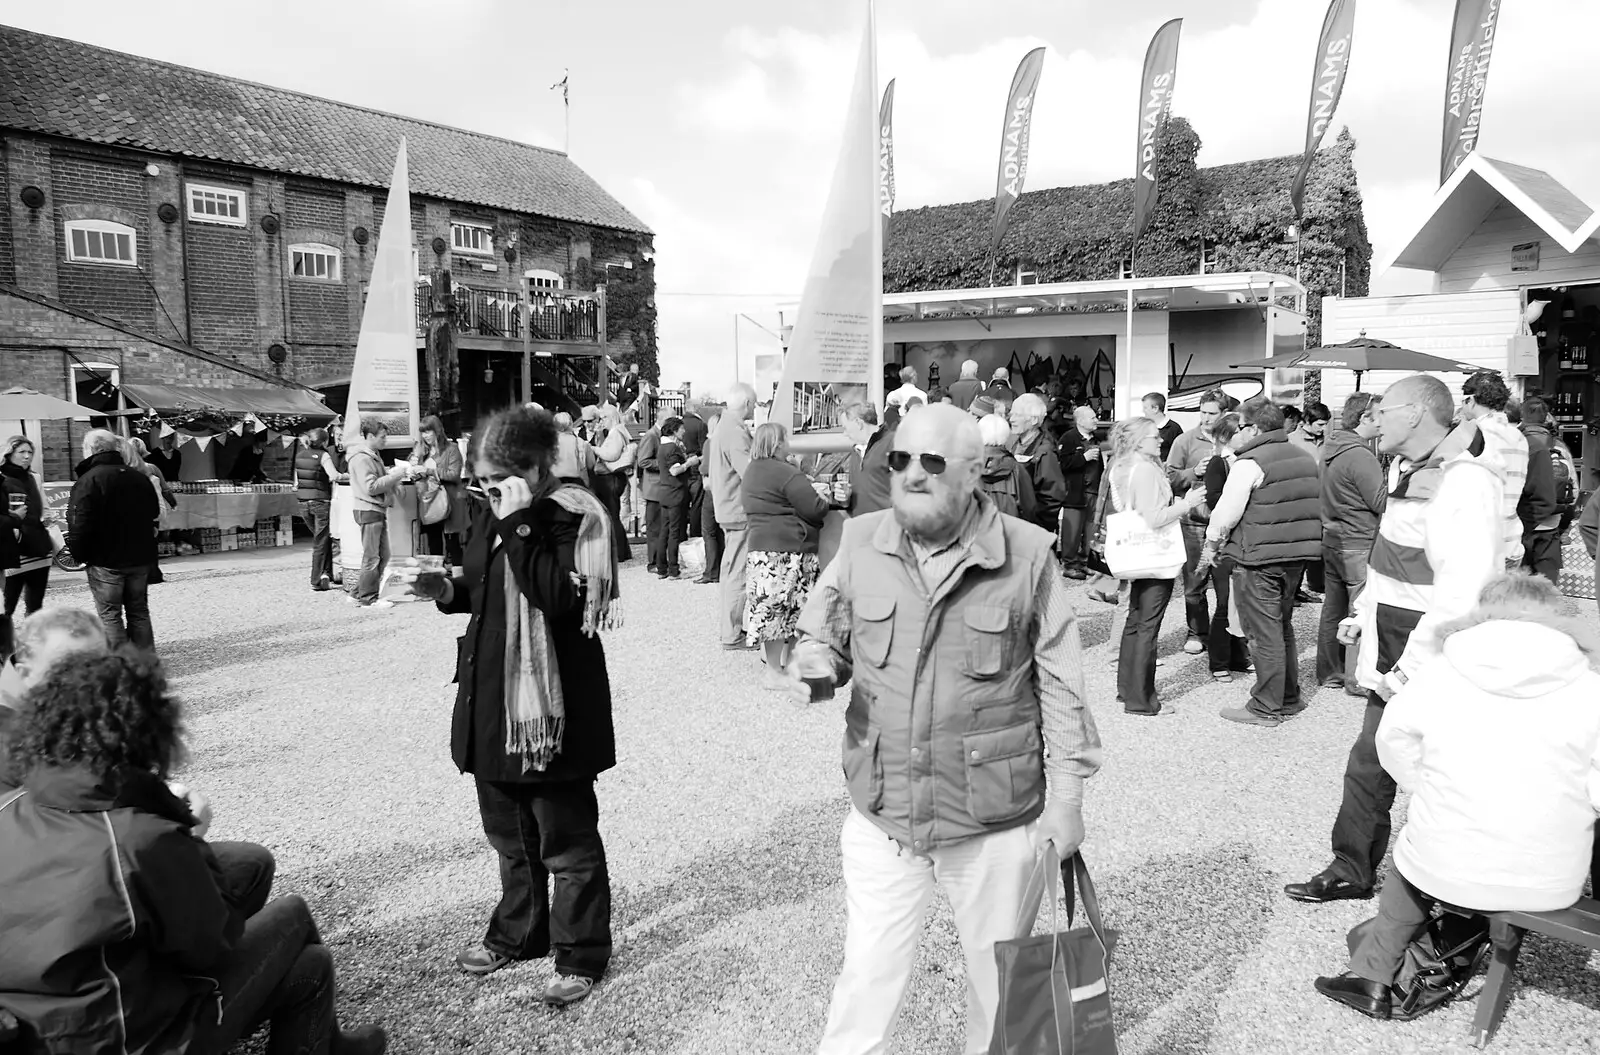 People with beer mill around, from The Aldeburgh Food Festival, Snape Maltings, Suffolk - 25th September 2010